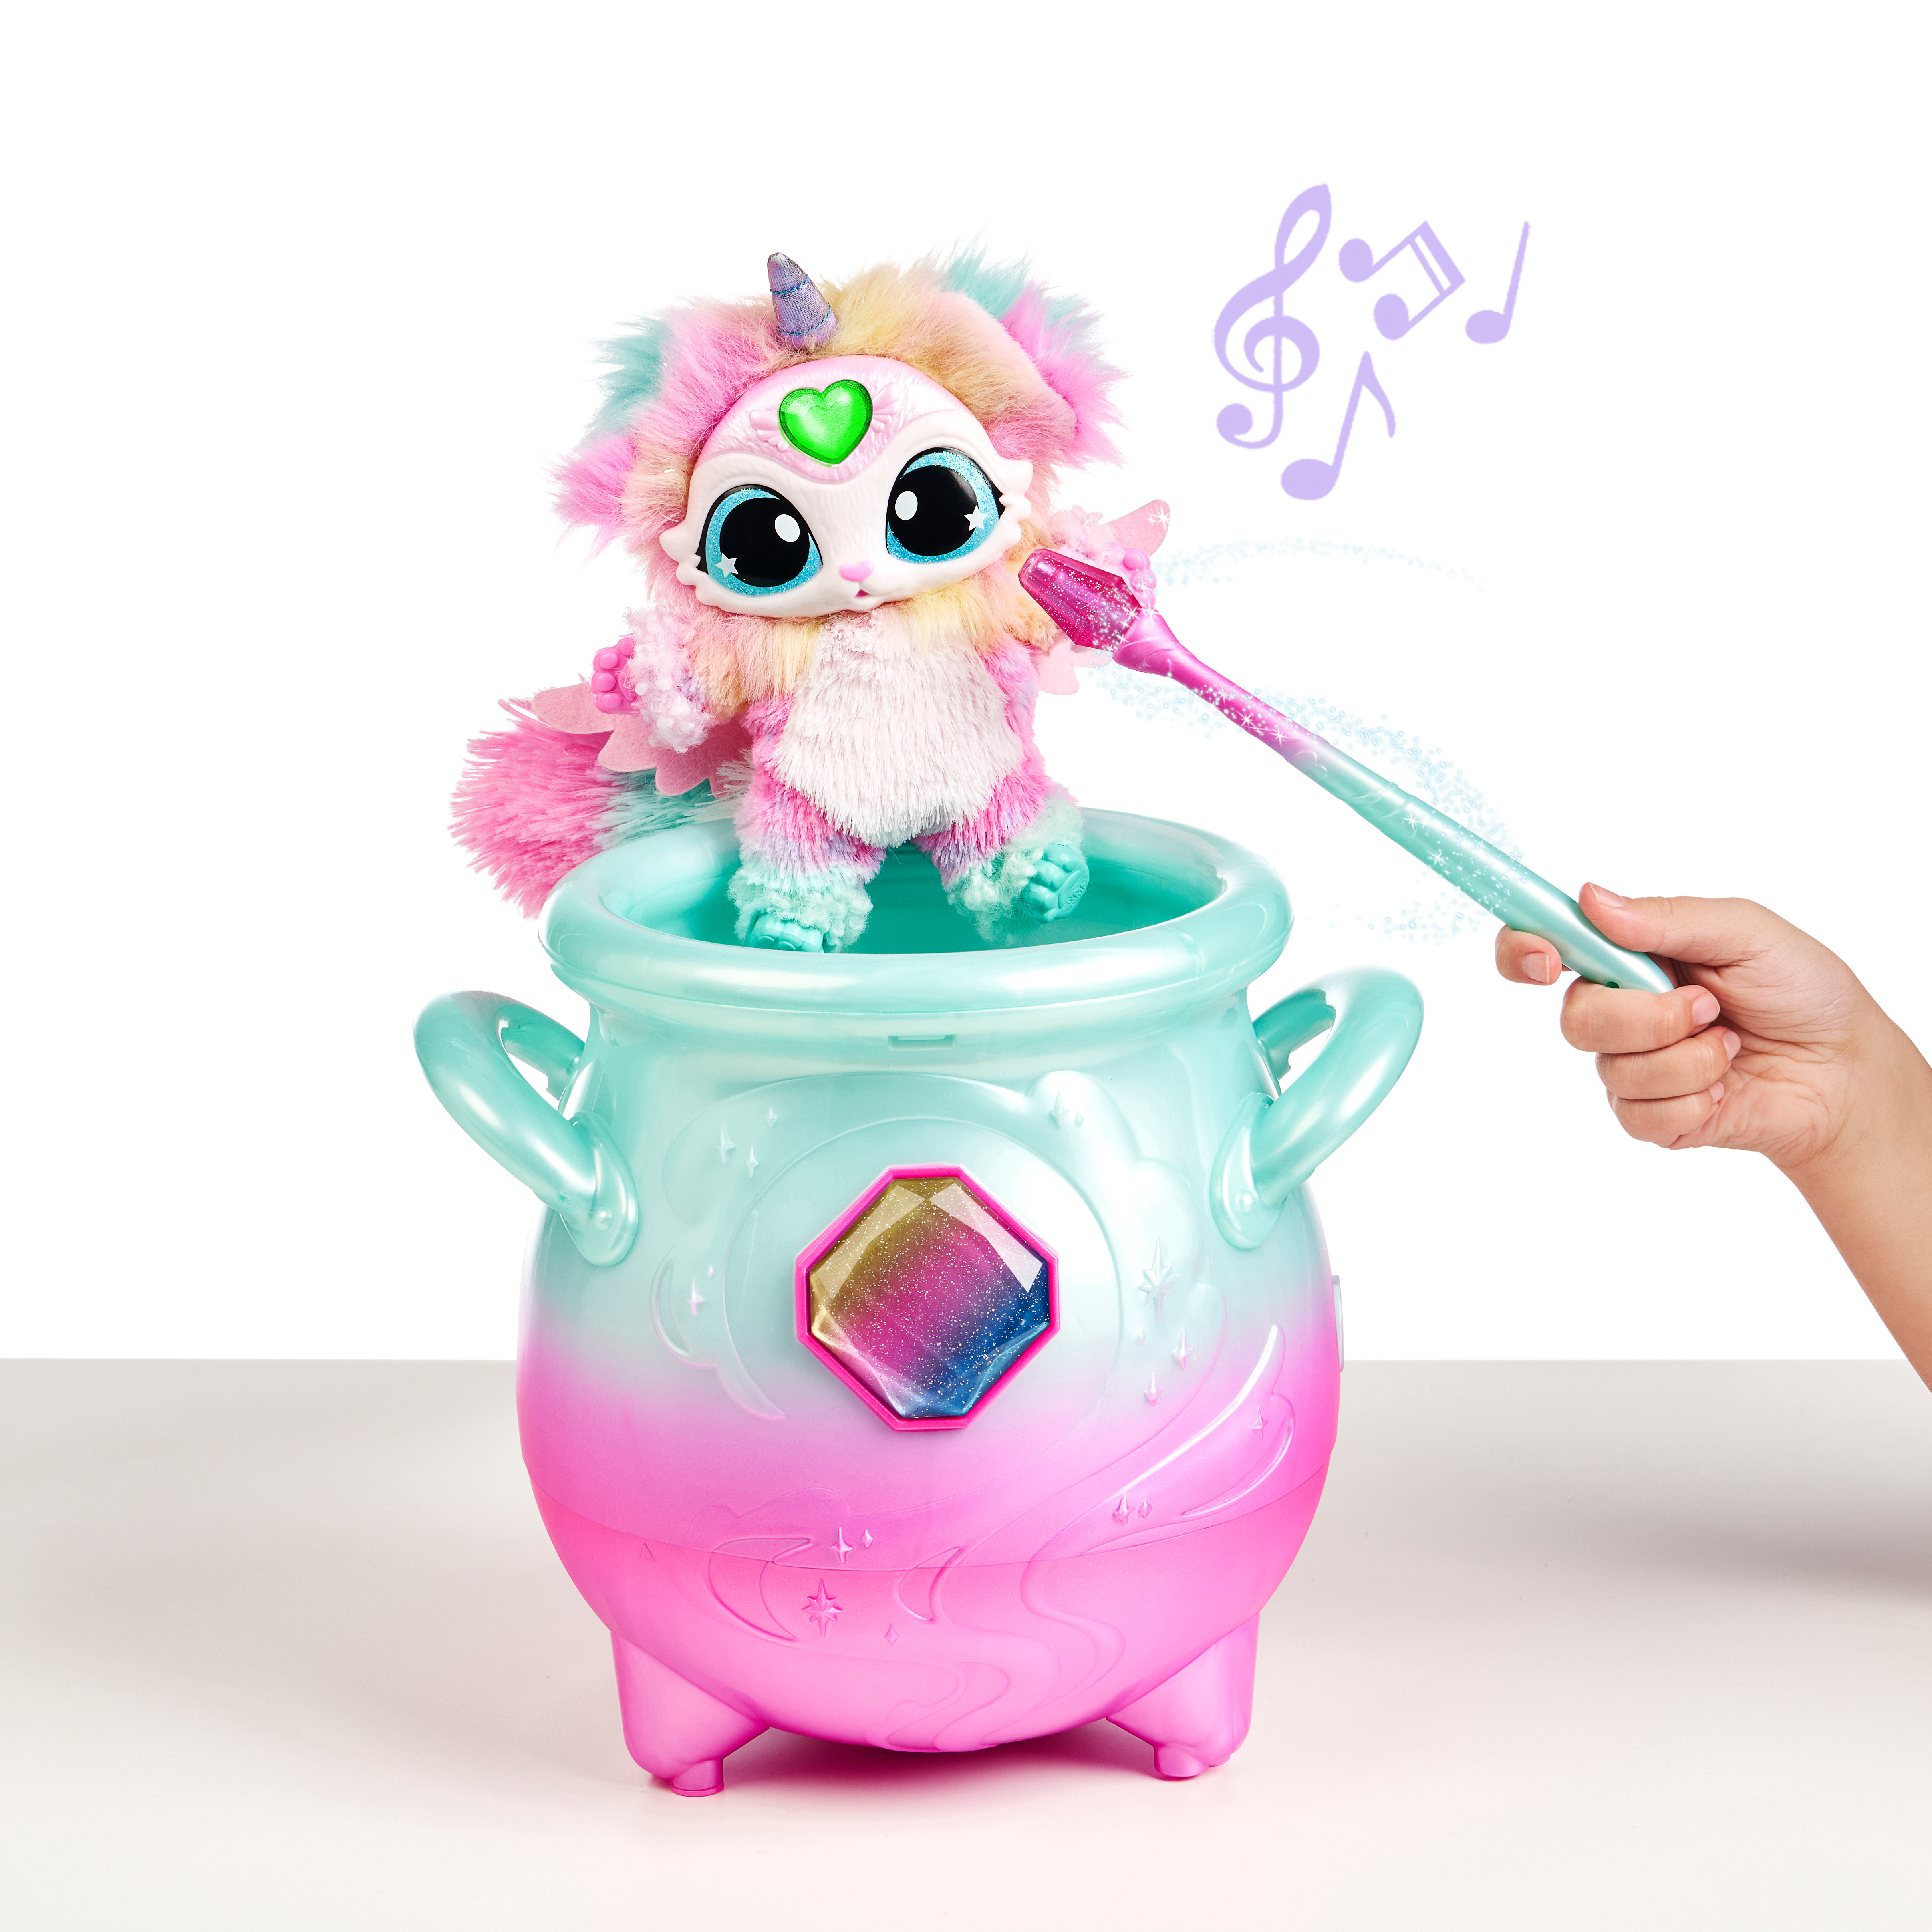 Magic Mixies Magical Misting Cauldron with Exclusive Interactive 8 inch Rainbow Plush Toy and 50+ Sounds and Reactions, Toys for Kids, Ages 5+ - image 3 of 13